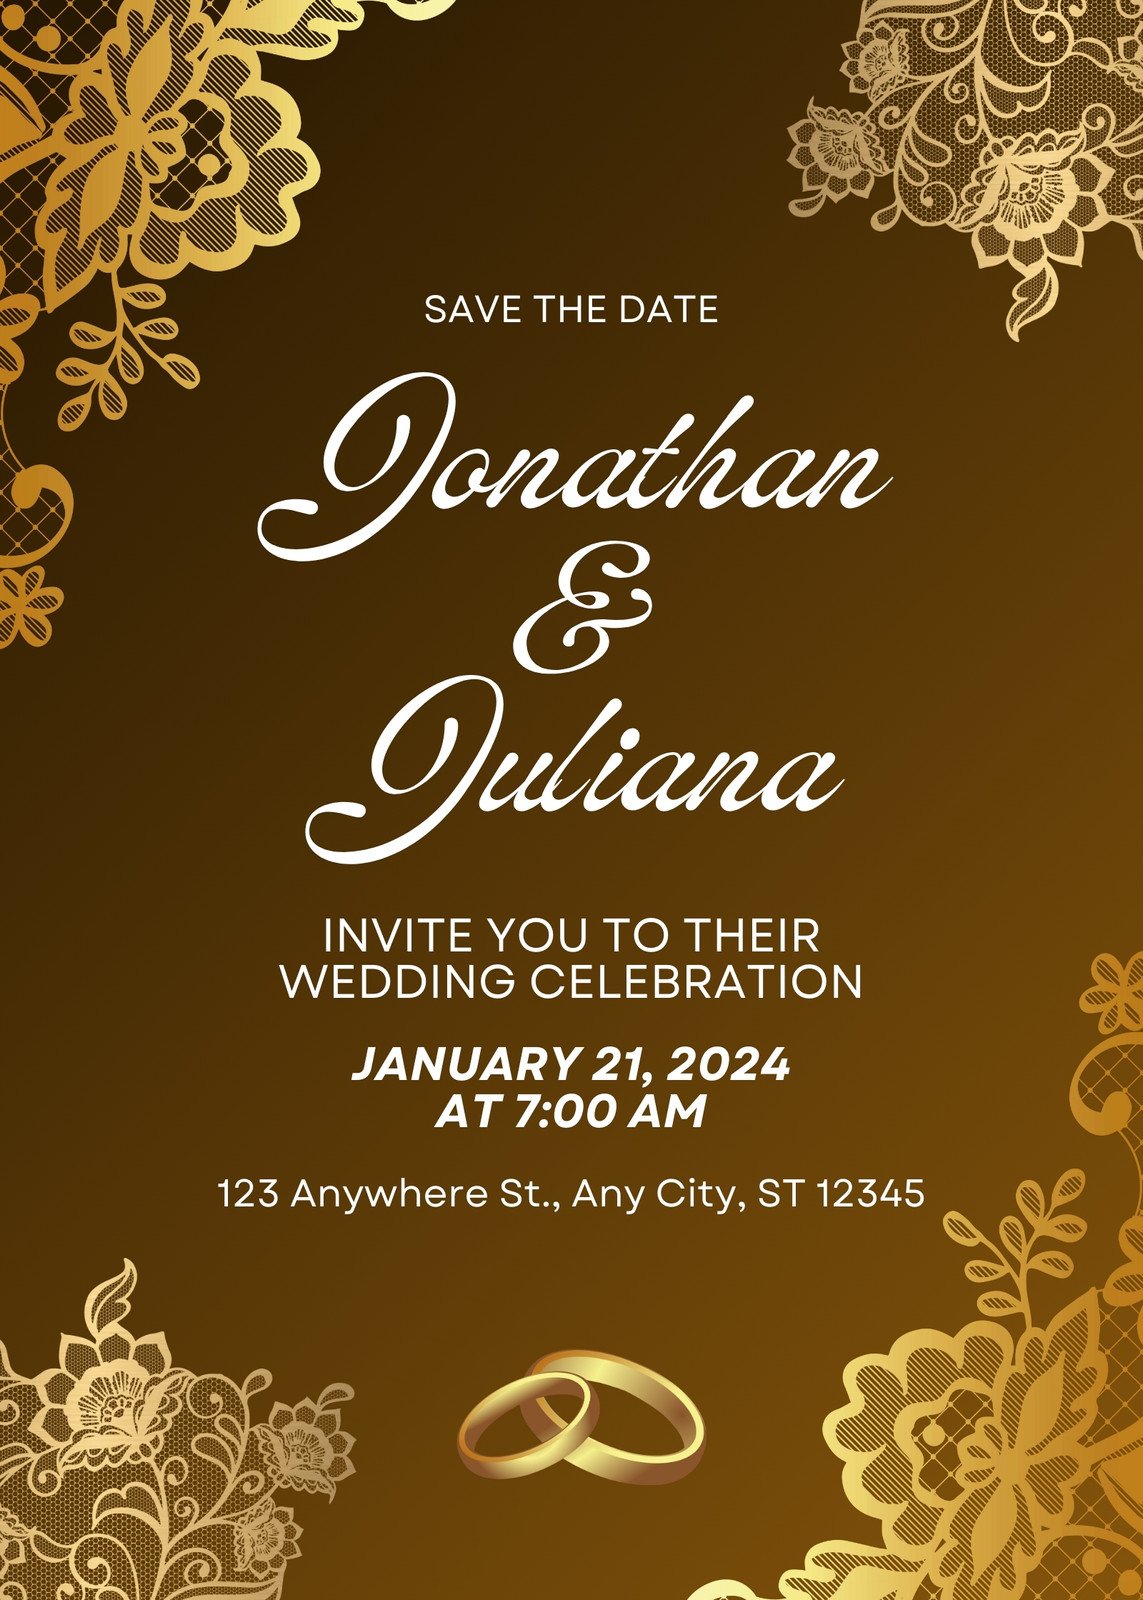 Free, Beautiful Invitation Card Templates to Personalize